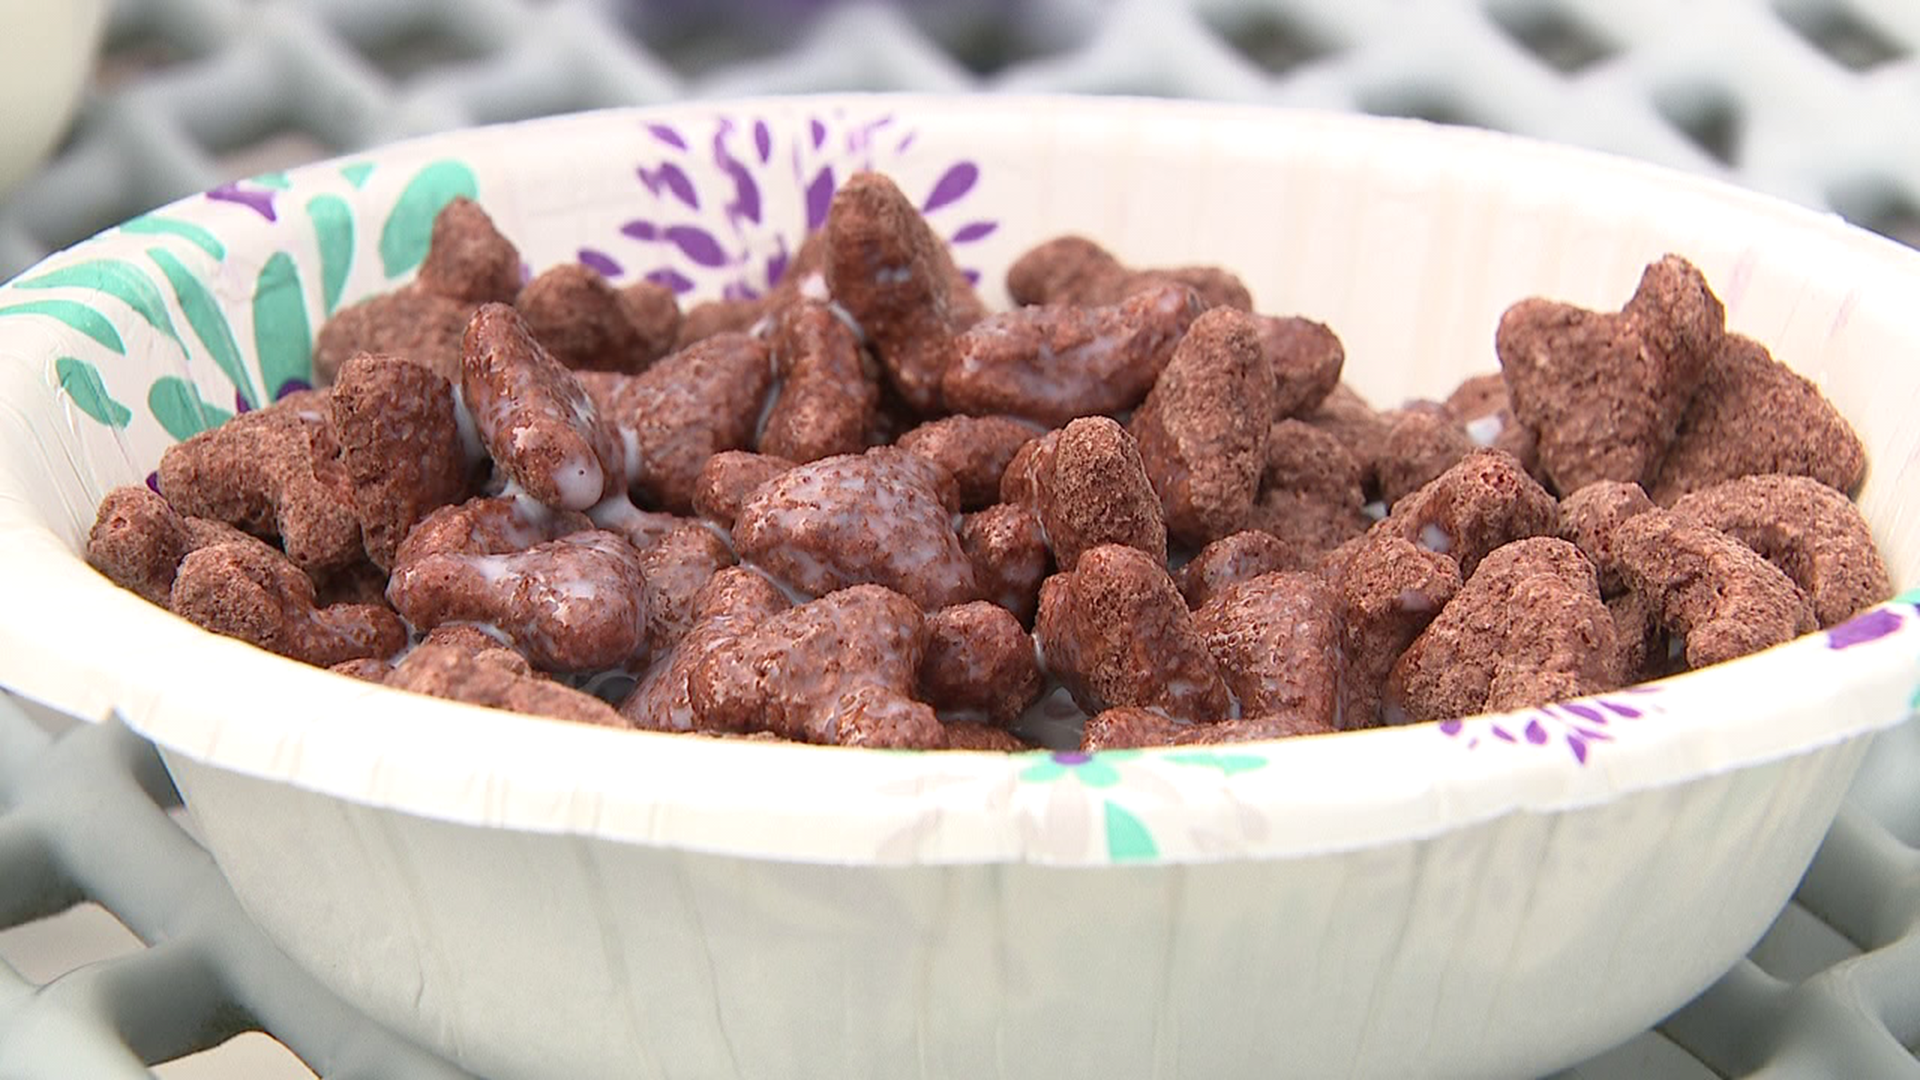 General Mills recently joined forces with Hershey's to release a chocolaty new cereal.